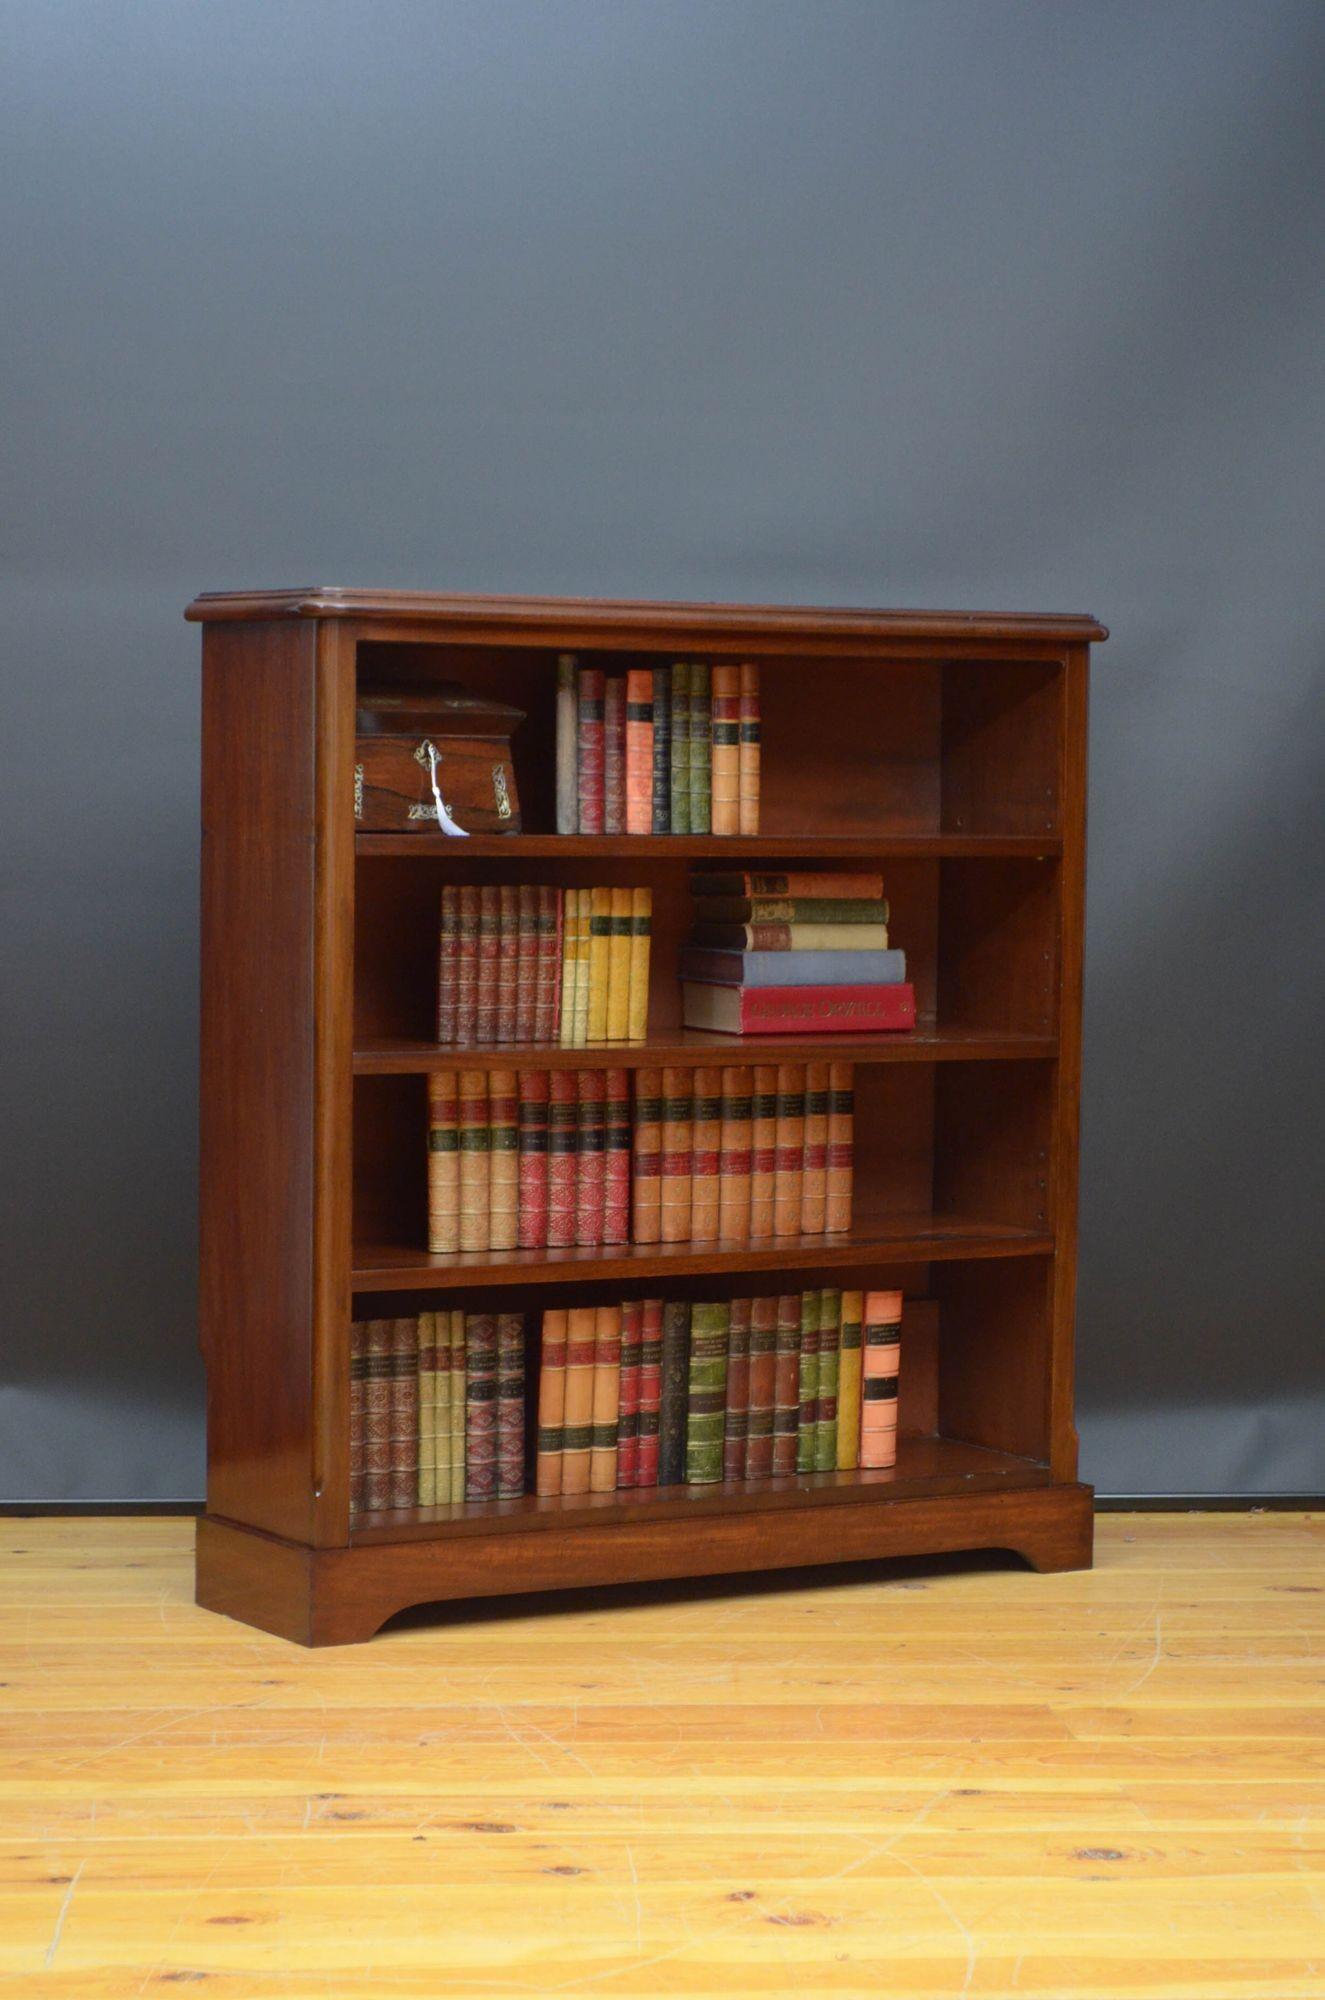 Sn5517 Victorian, mahogany open bookcase of round shoulder design, having figured mahogany top with moulded edge above three height adjustable shelves, all standing on shaped plinth base. This antique bookcase is in home ready condition. c1860
H44